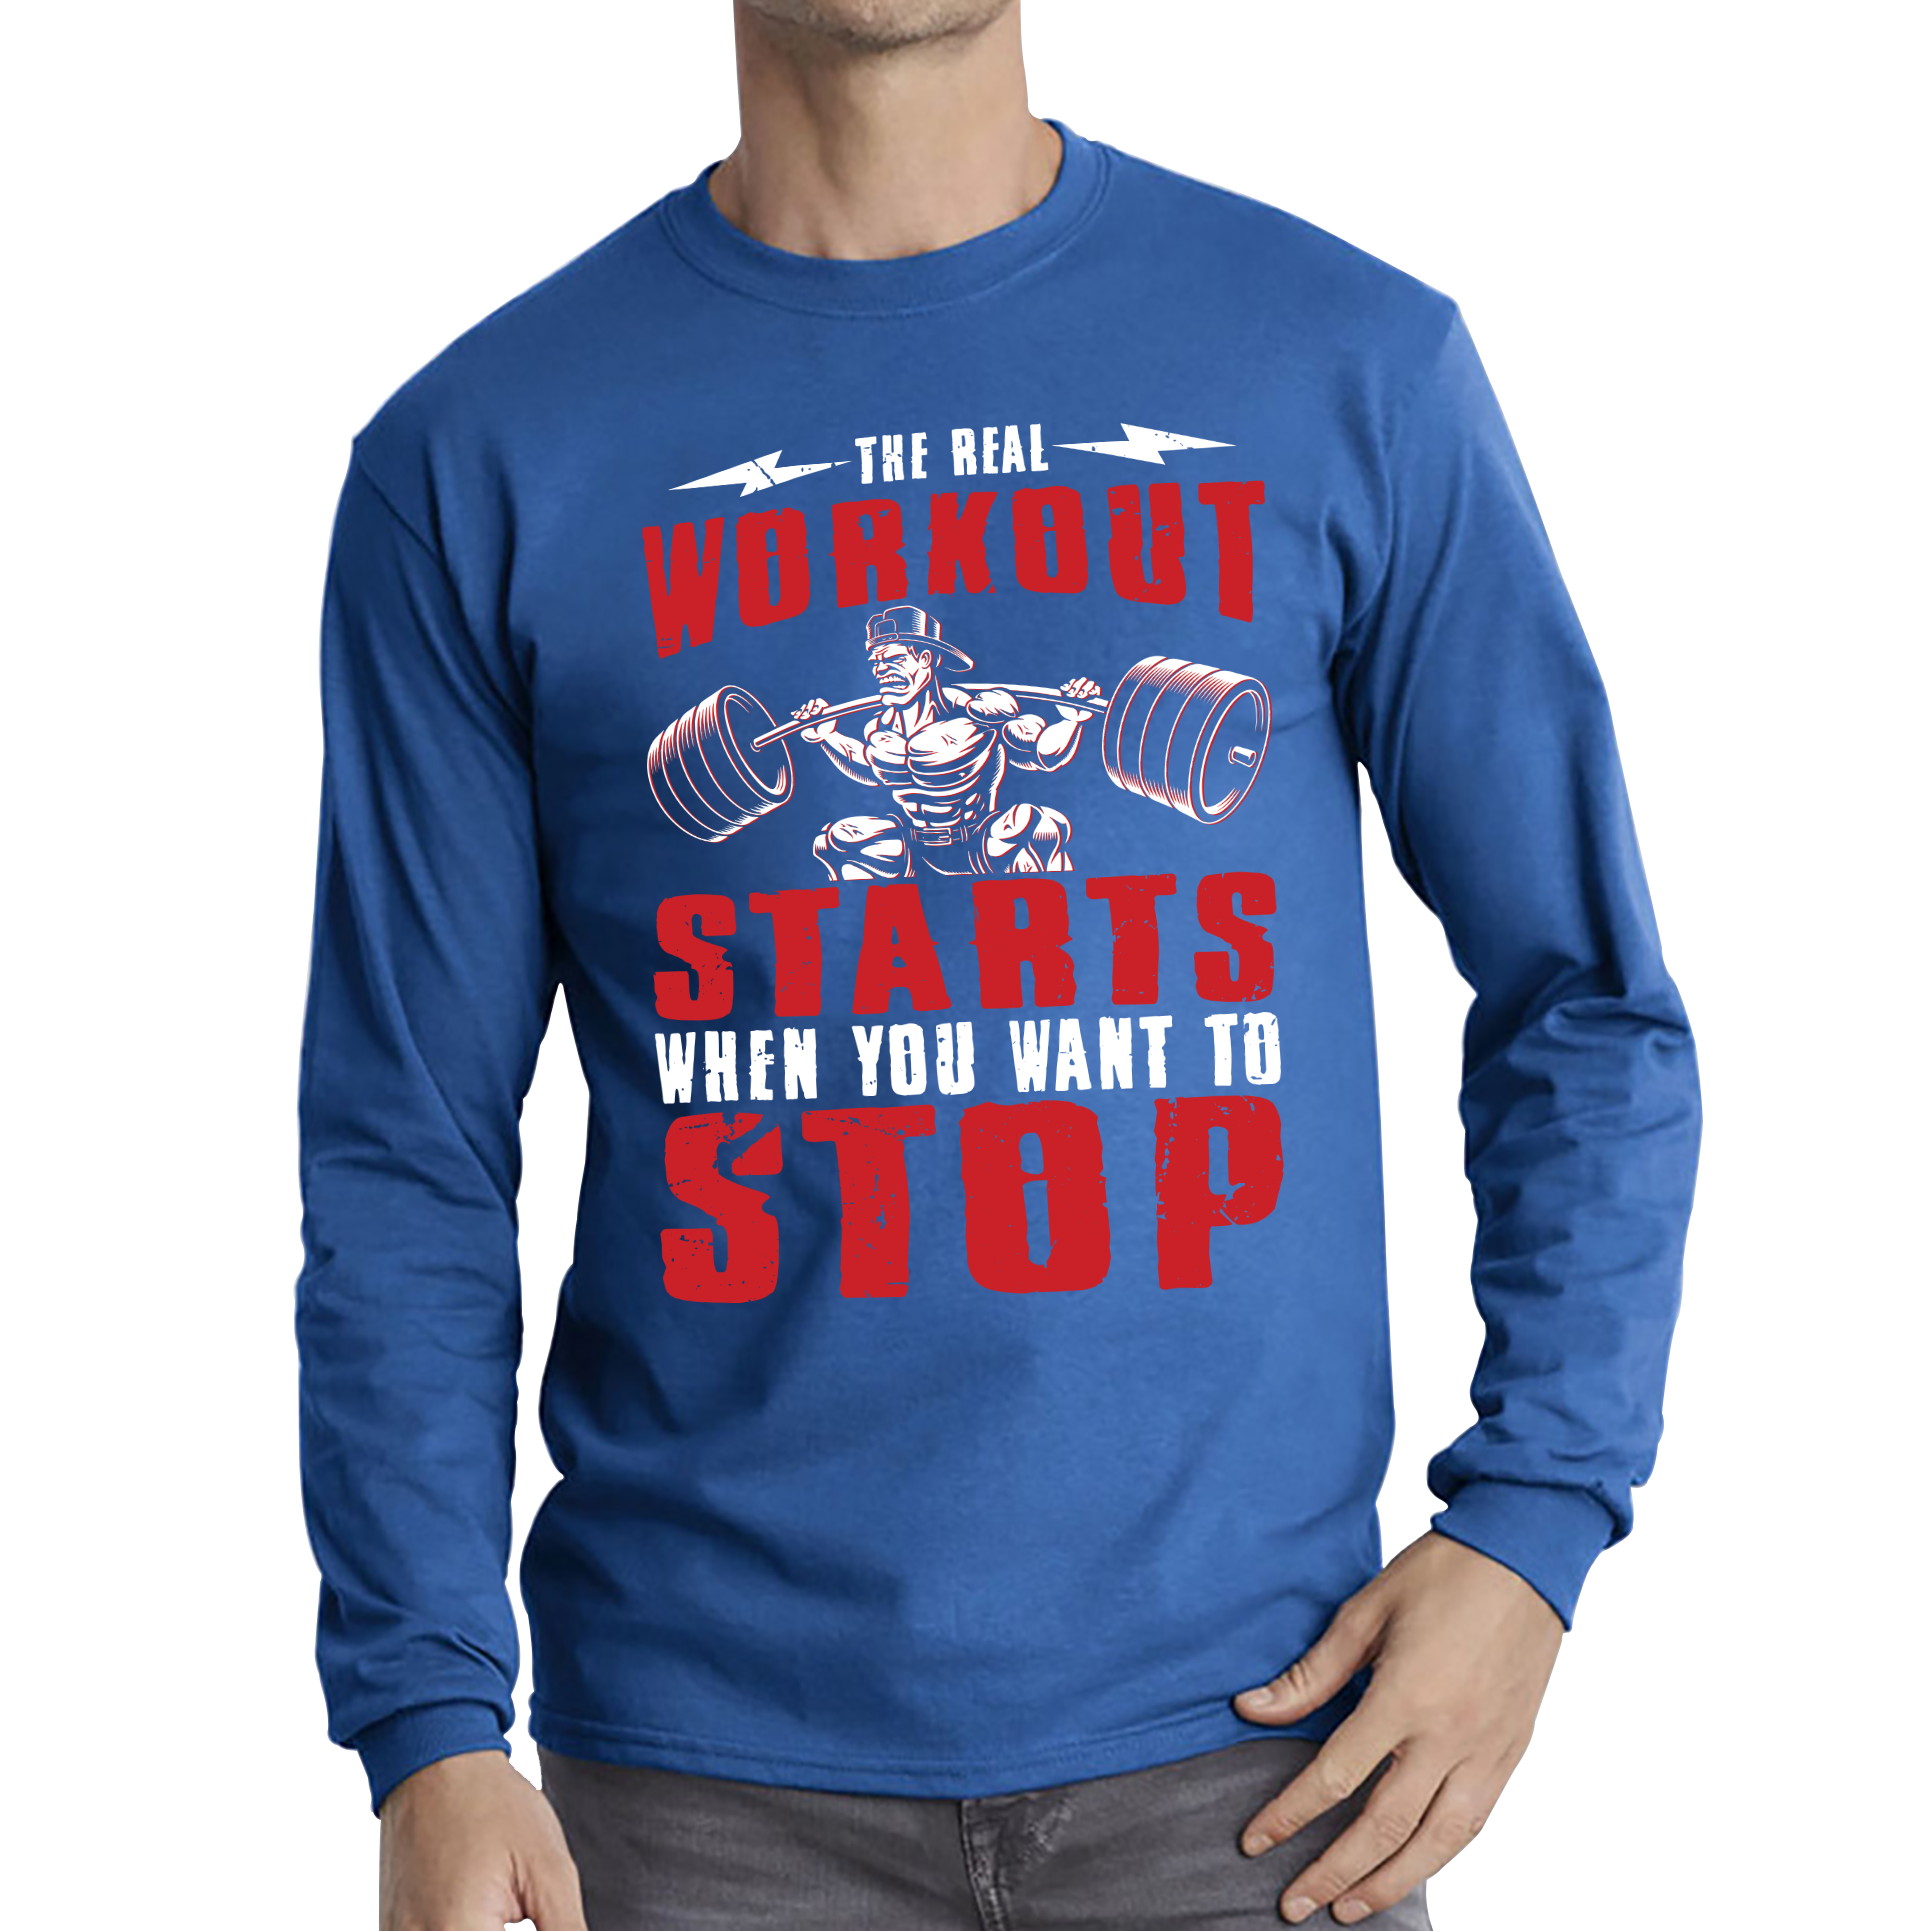 The Real Workout Starts when You Want To Stop Motivational Gym Adult Long Sleeve T Shirt